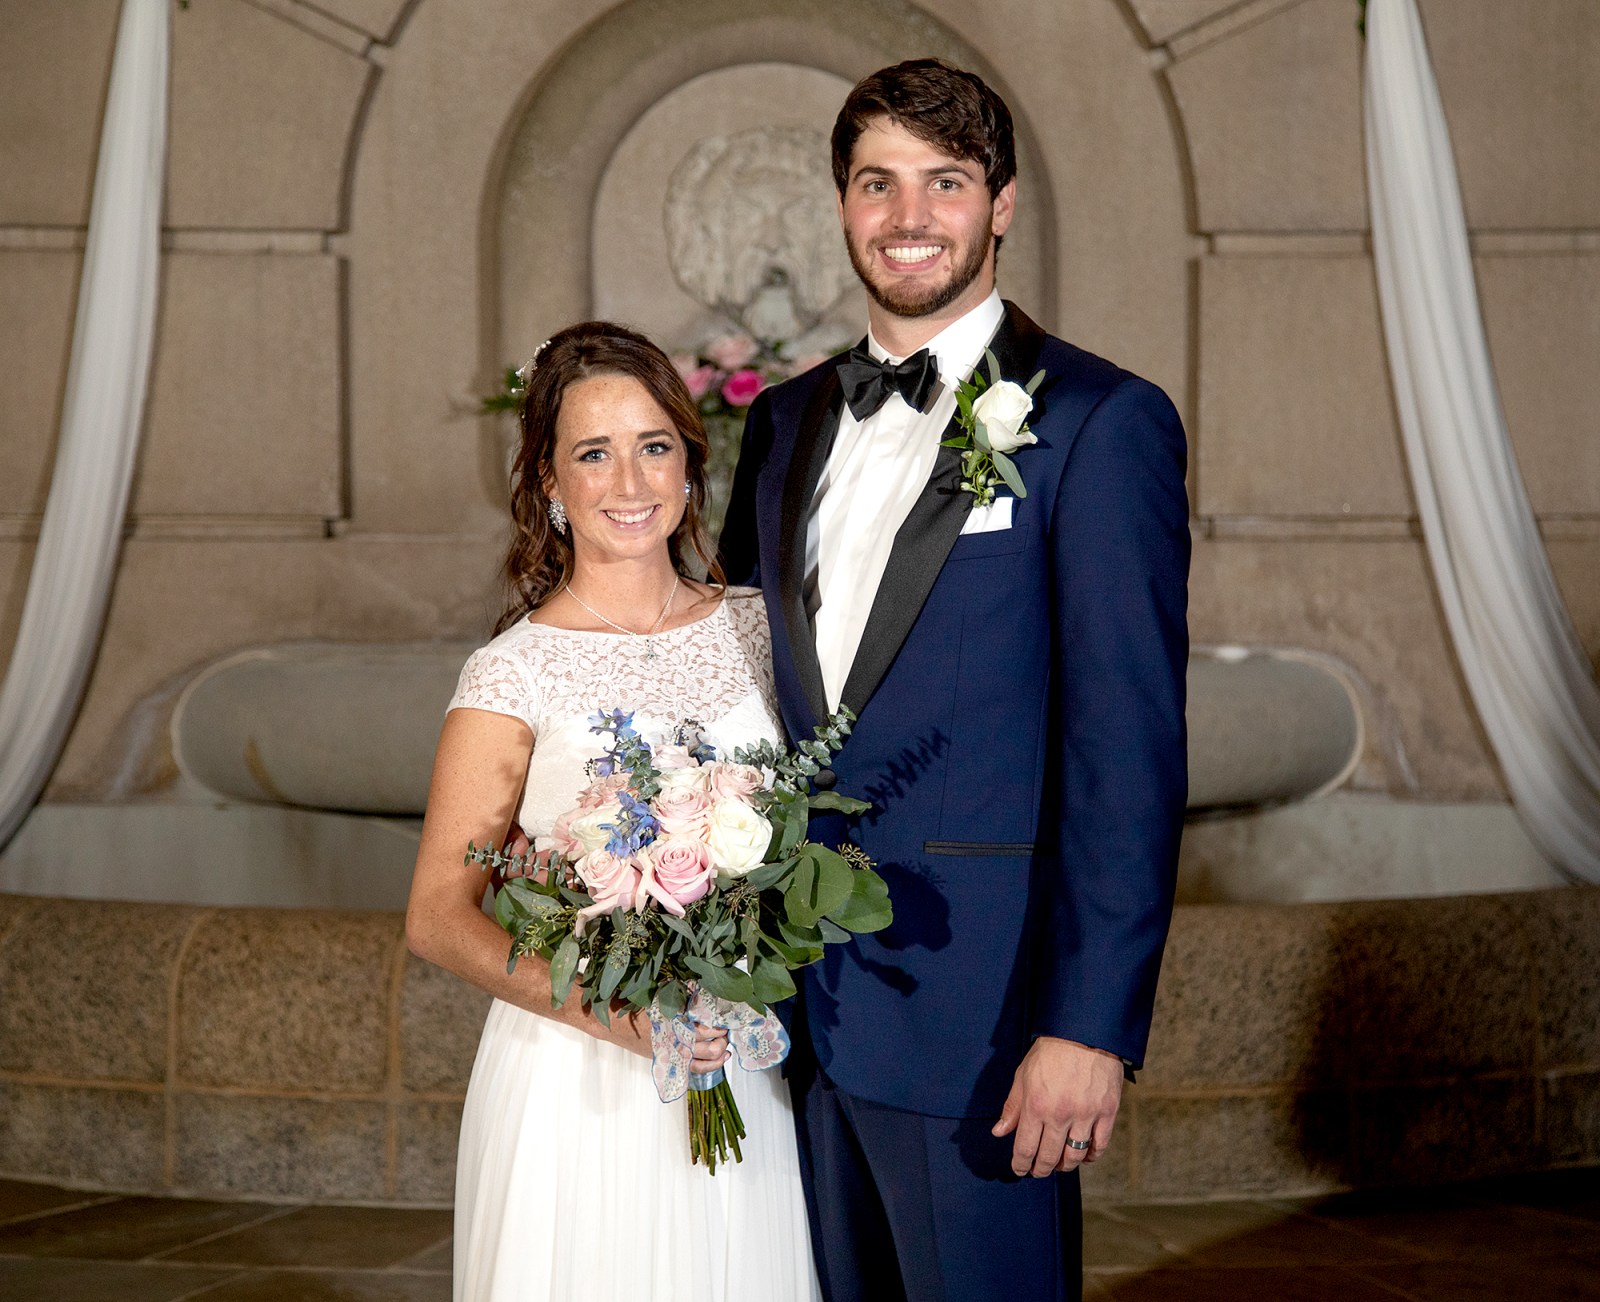 MarriedAtFirstSight - Married At First Sight - Season 10  Married-At-First-Sight-Derek-Katie